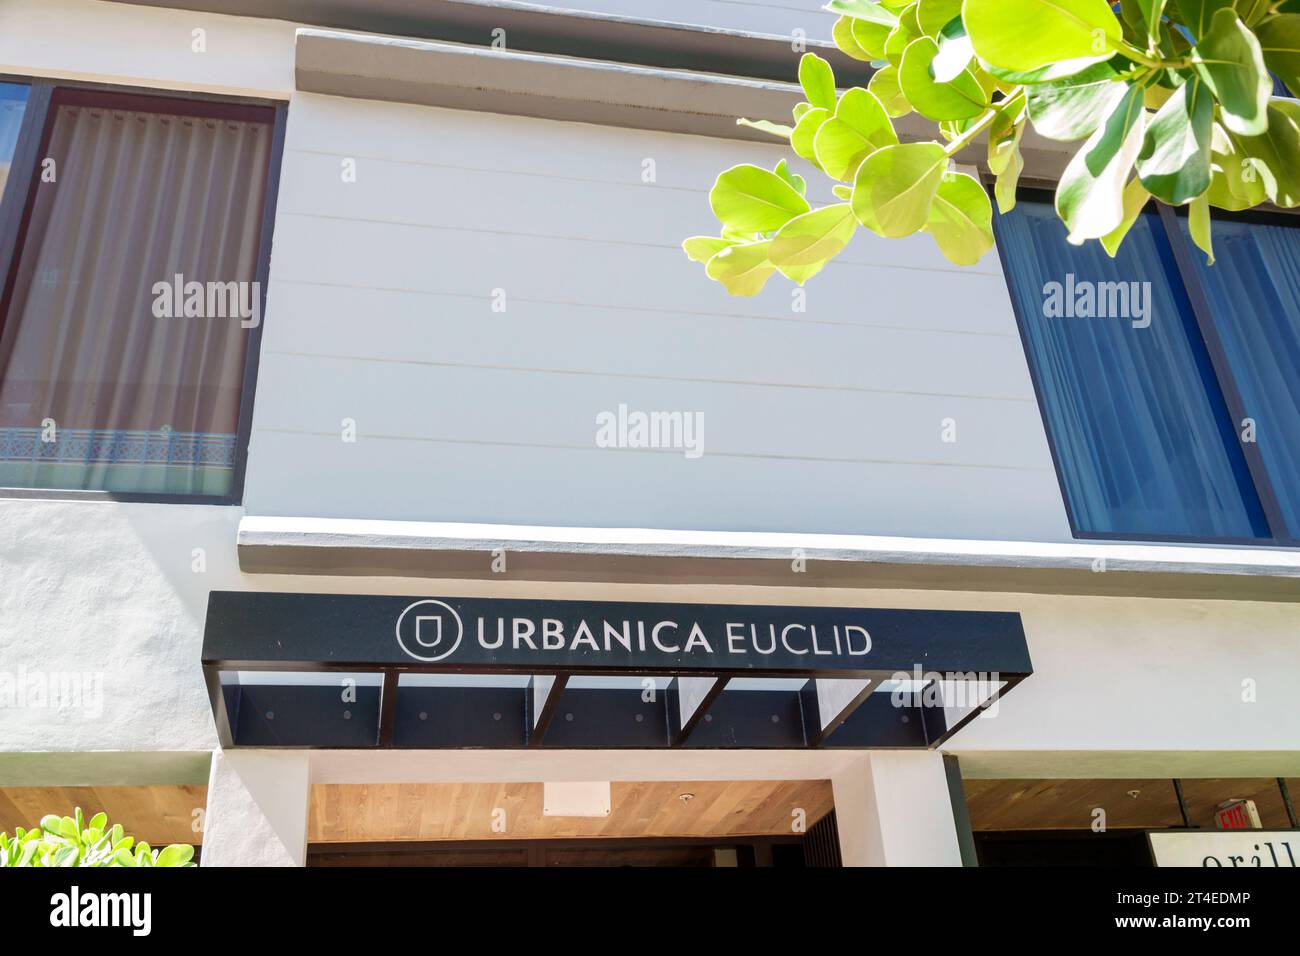 Miami Beach Florida,outside exterior,building front entrance hotel,Urbanica Euclid Hotel sign,hotels motels businesses Stock Photo